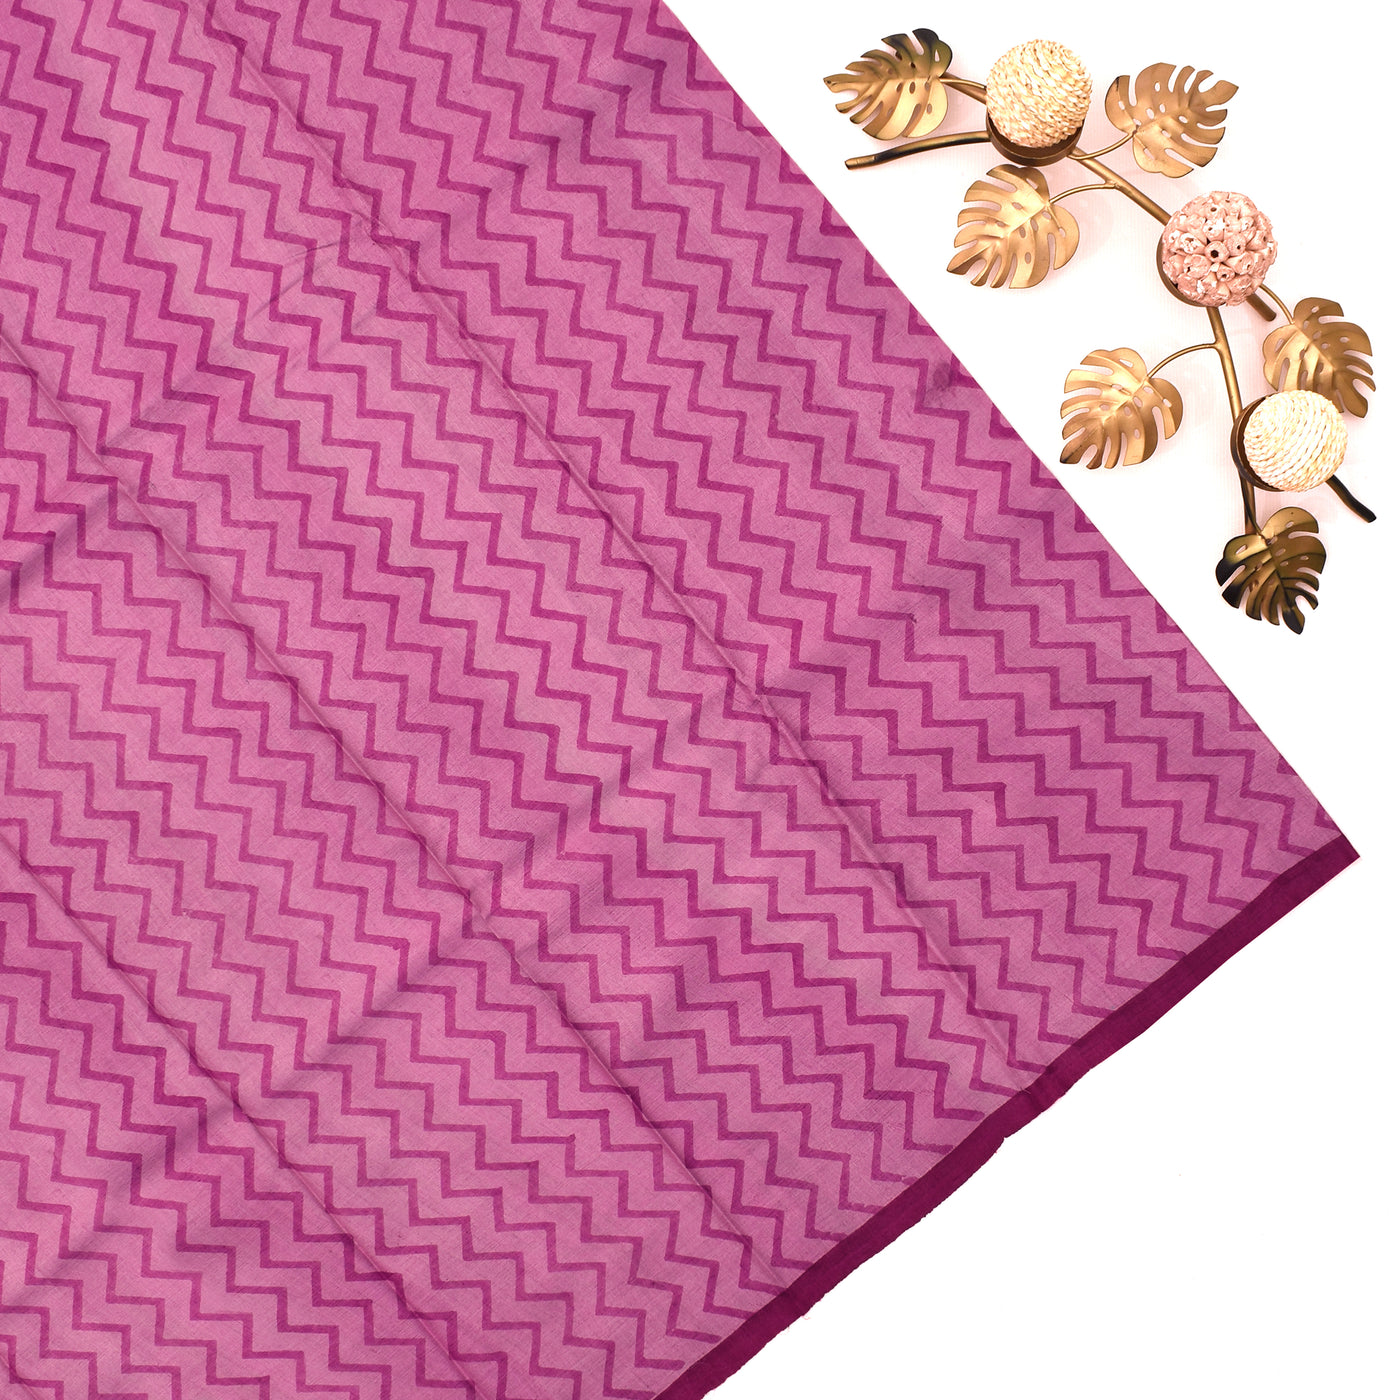 Off White and Magenta Tussar Silk Saree with Floral Printed Design